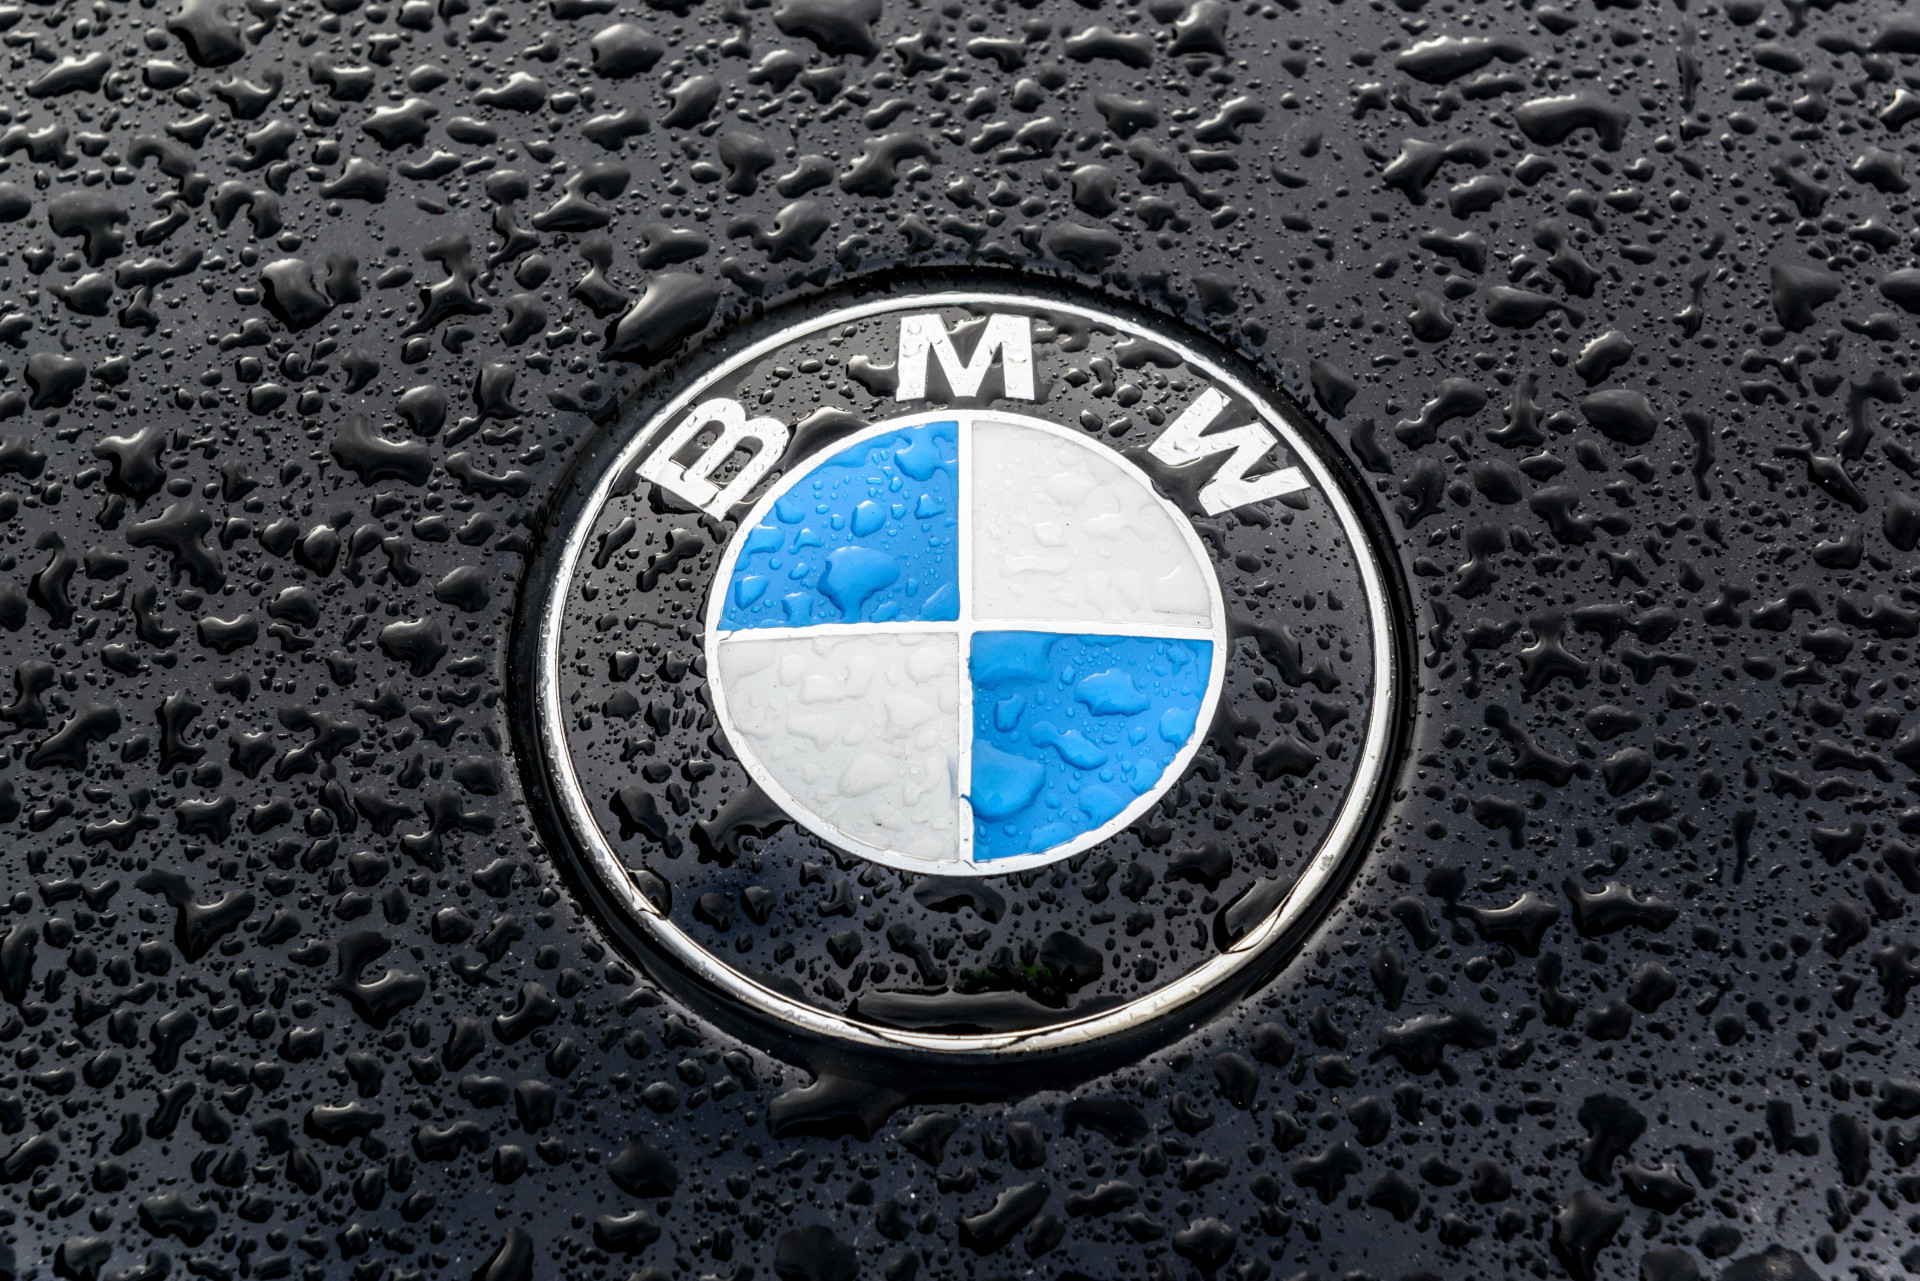 BMW was founded with the objective of making engines for airplanes, and only later started producing motorcycles.